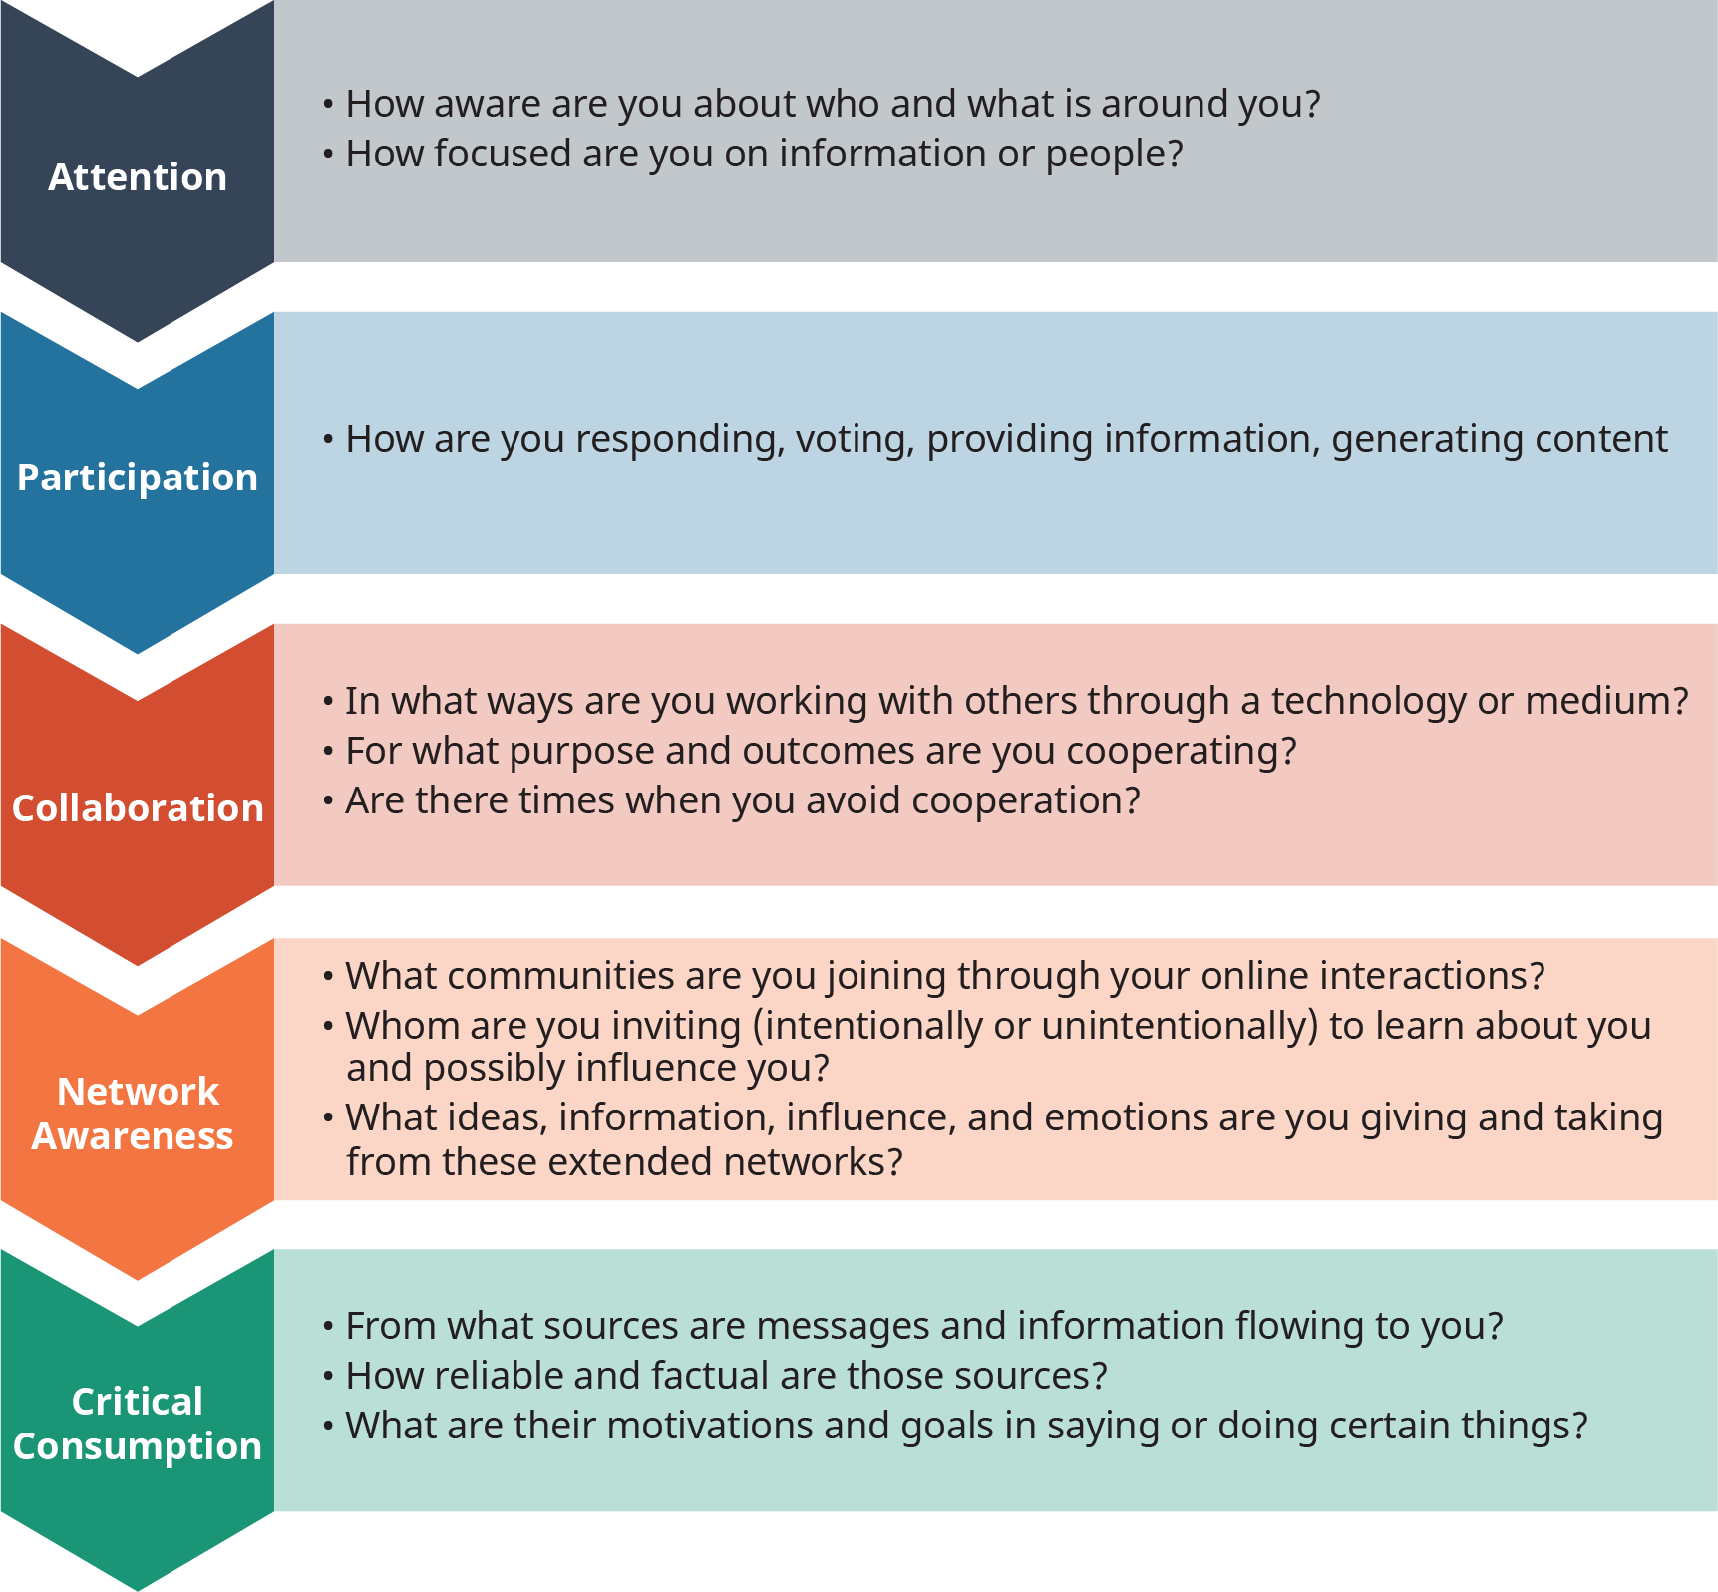 A diagram illustrates the five elements of social media literacy as “Attention,” “Participation,” “Collaboration,” “Network Awareness,” and “Critical Consumption.”